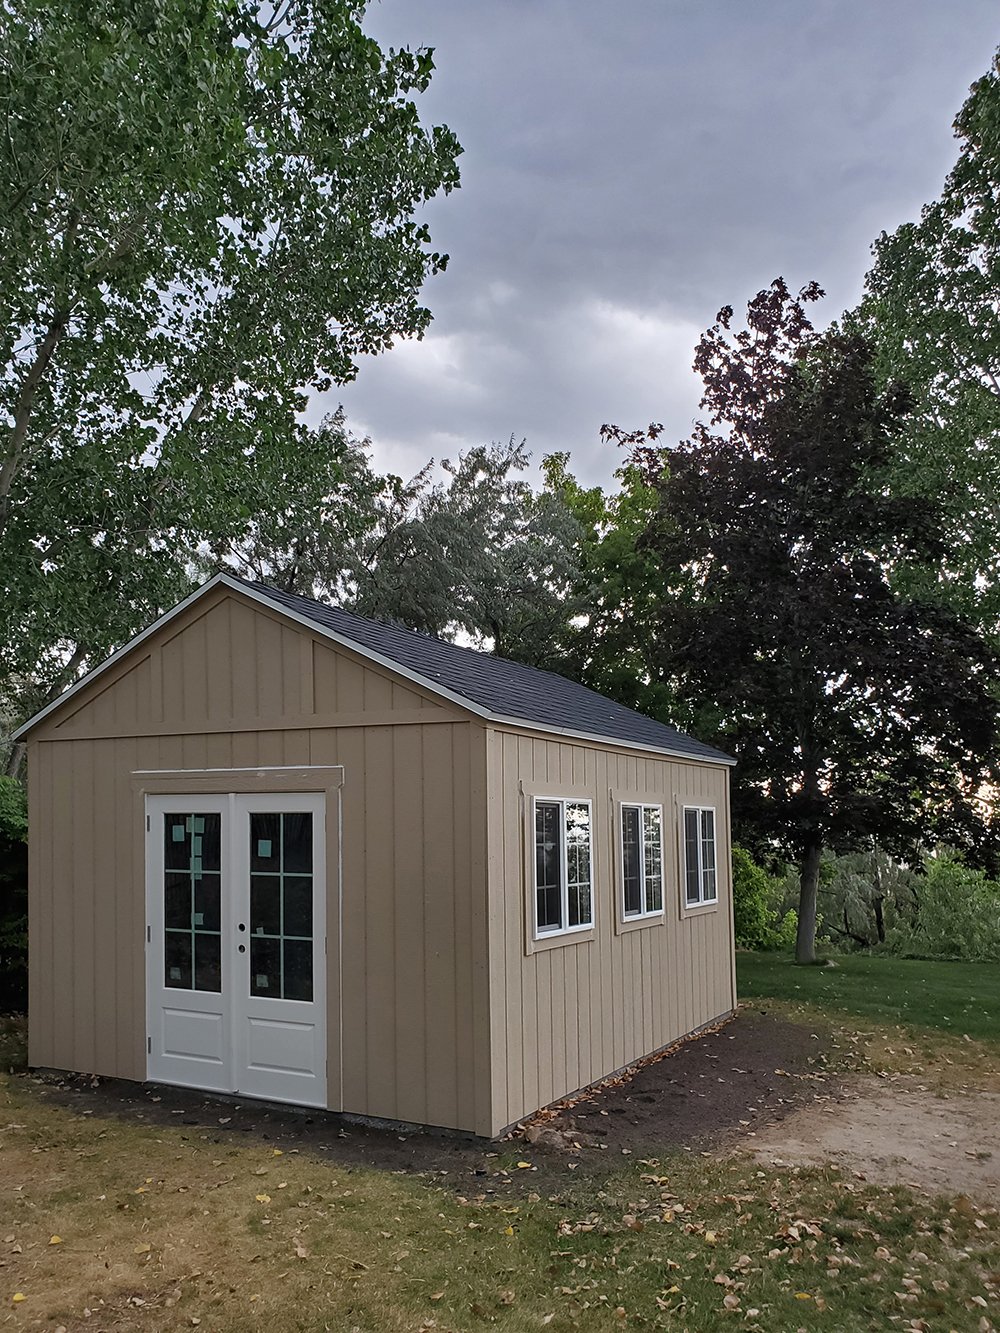 Our Shed Build, Supply List, and Budget - roomfortuesday.com